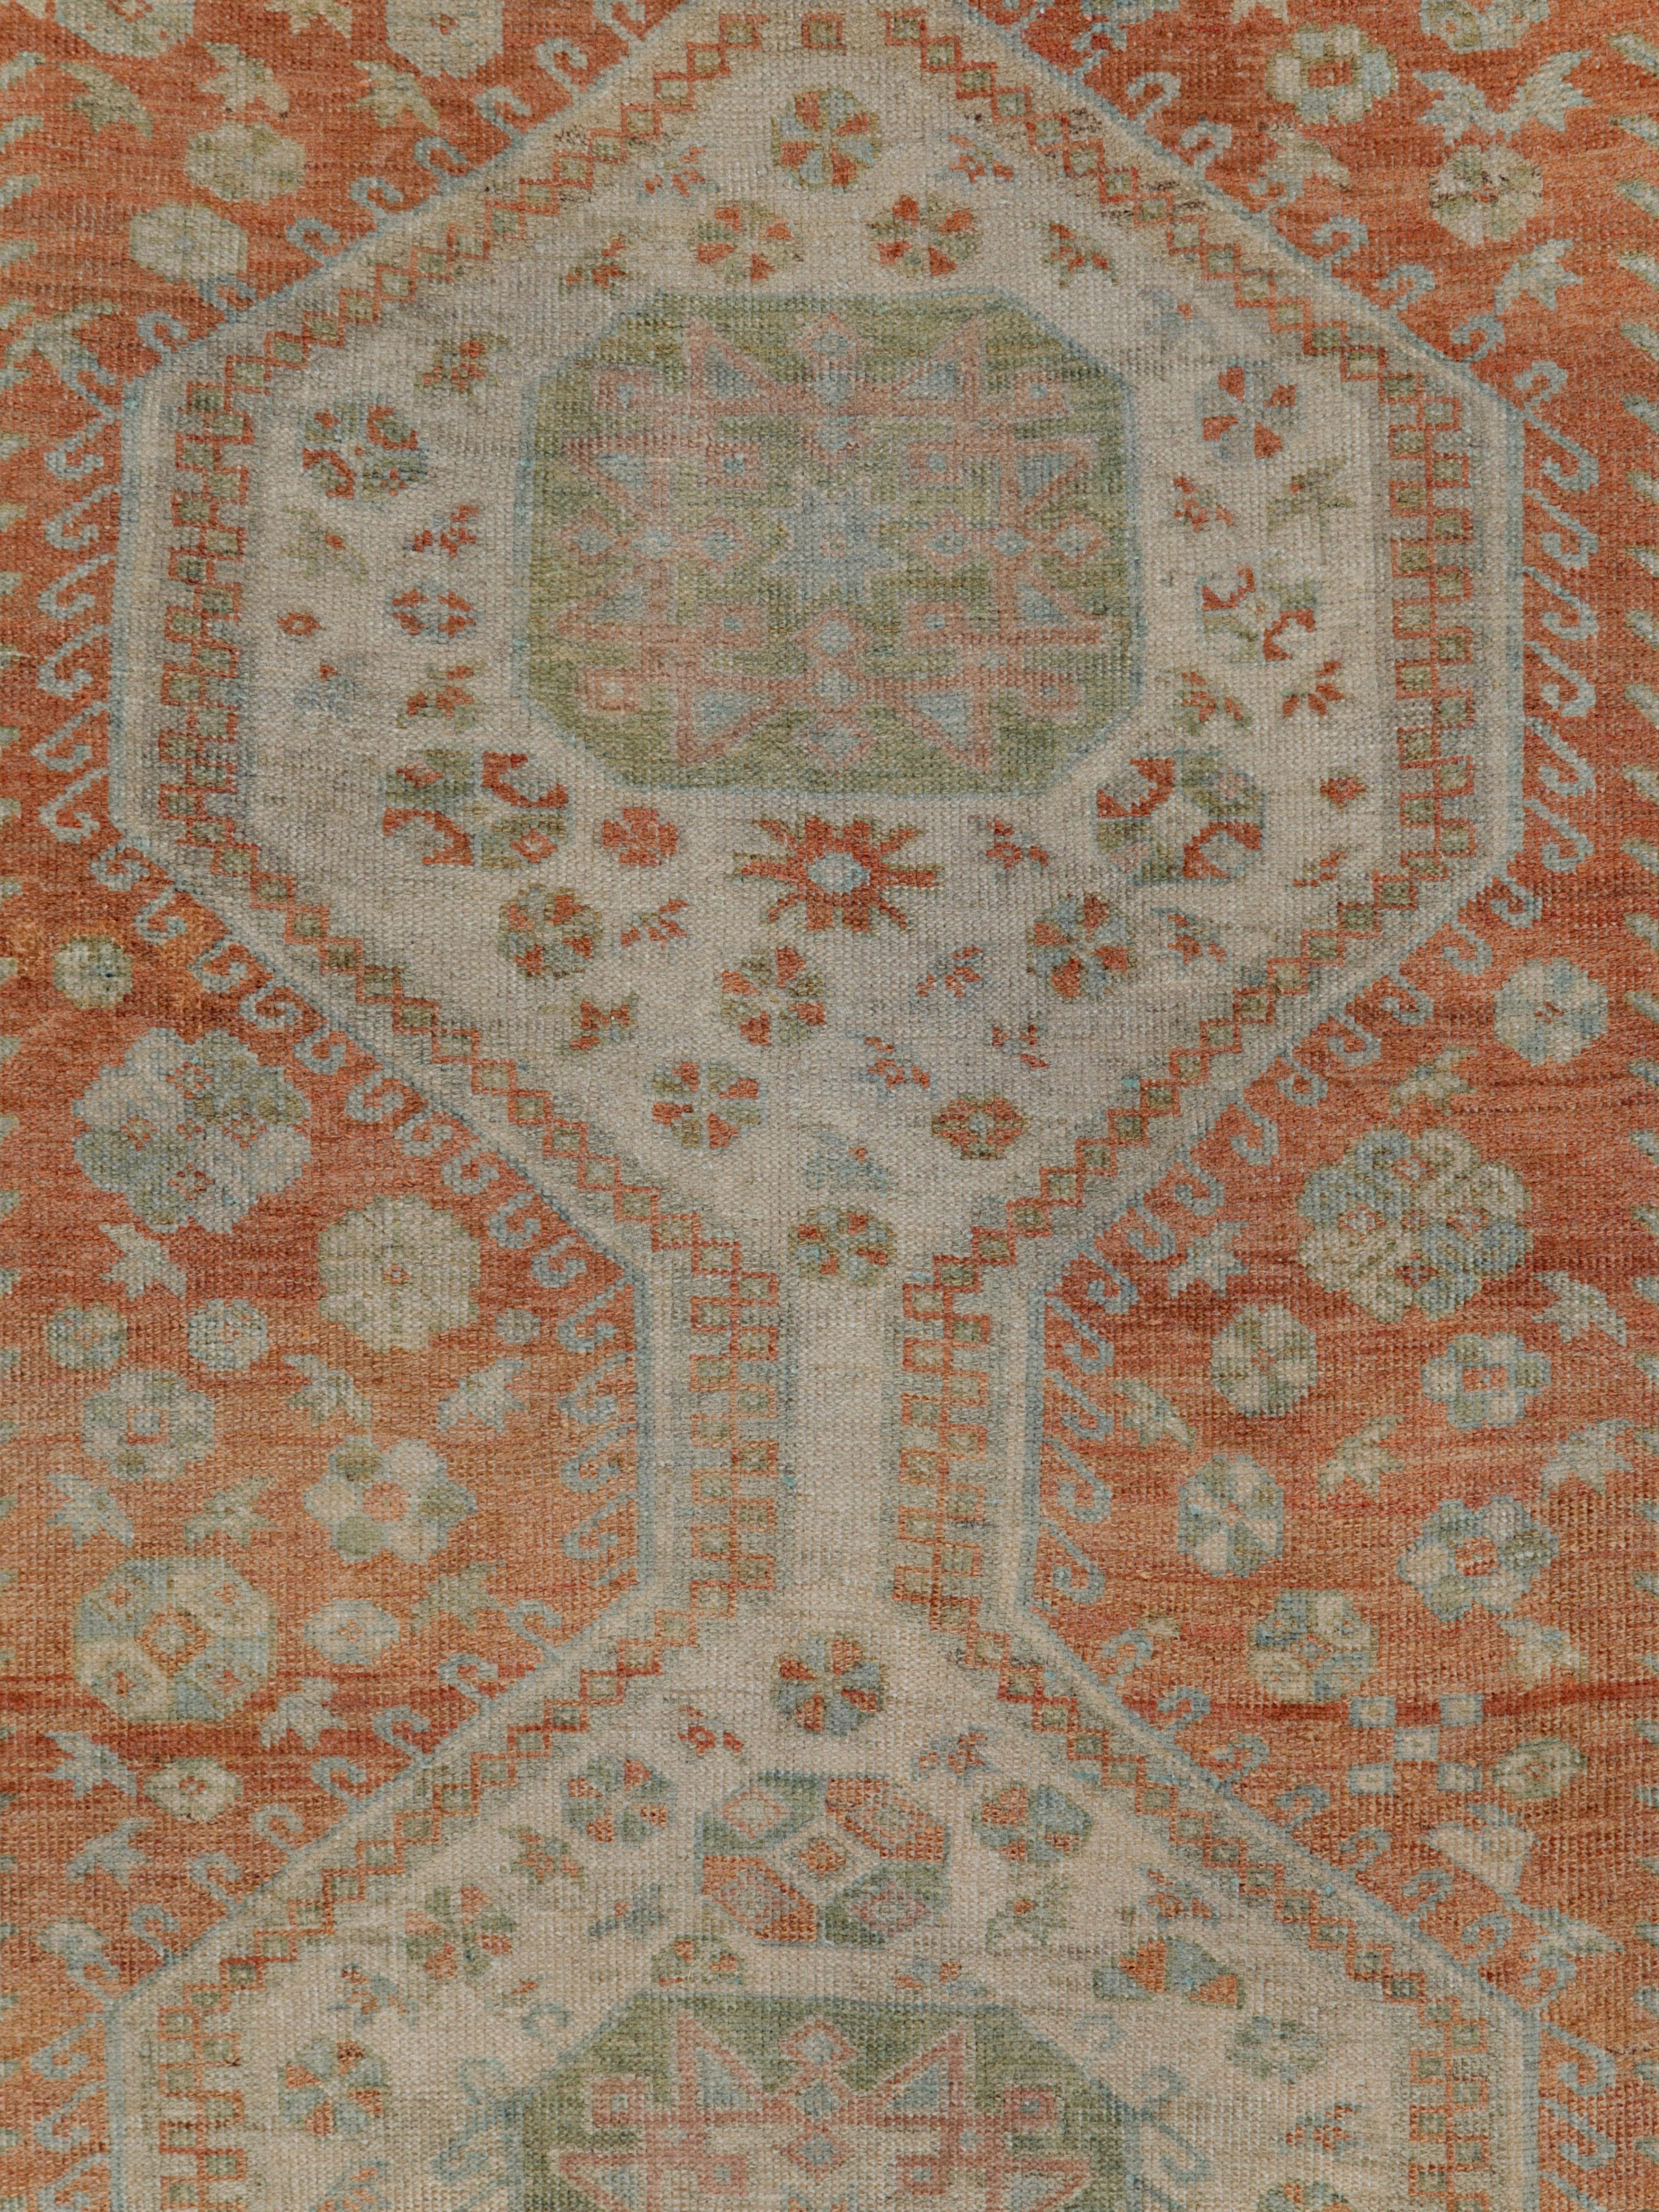 A vintage Persian Malayer rug from the mid-20th century with a pole design consisting of 3 geometric medallions outlined by a fish hook pattern in the centre and 2 elongated plants to the left and right. The terracotta field adds a delicate contrast